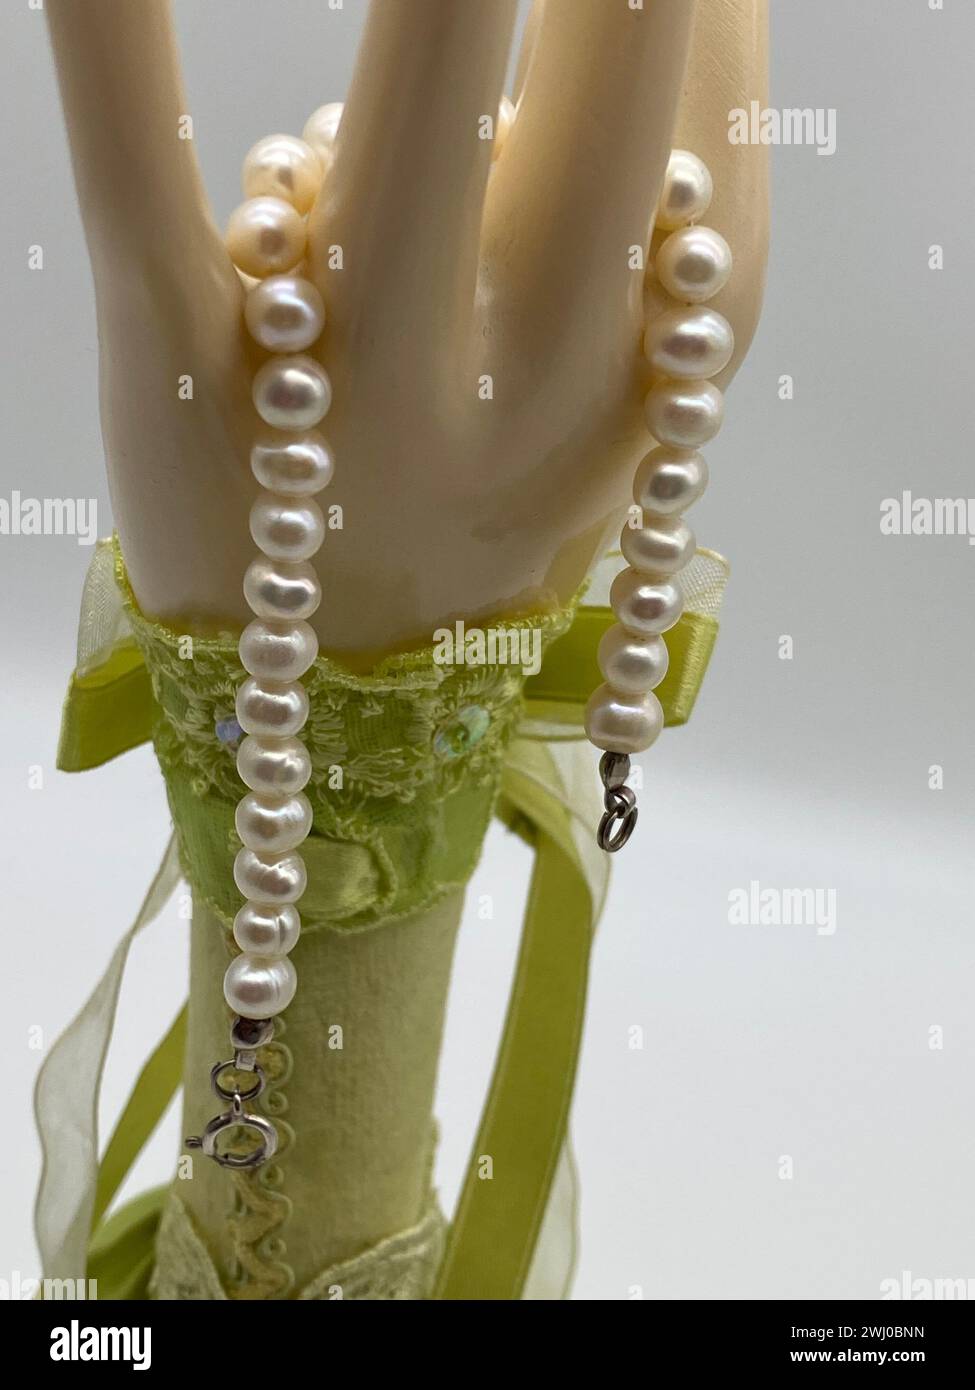 Close-up of a delicate doll's hand gently grasping a beautiful necklace Stock Photo